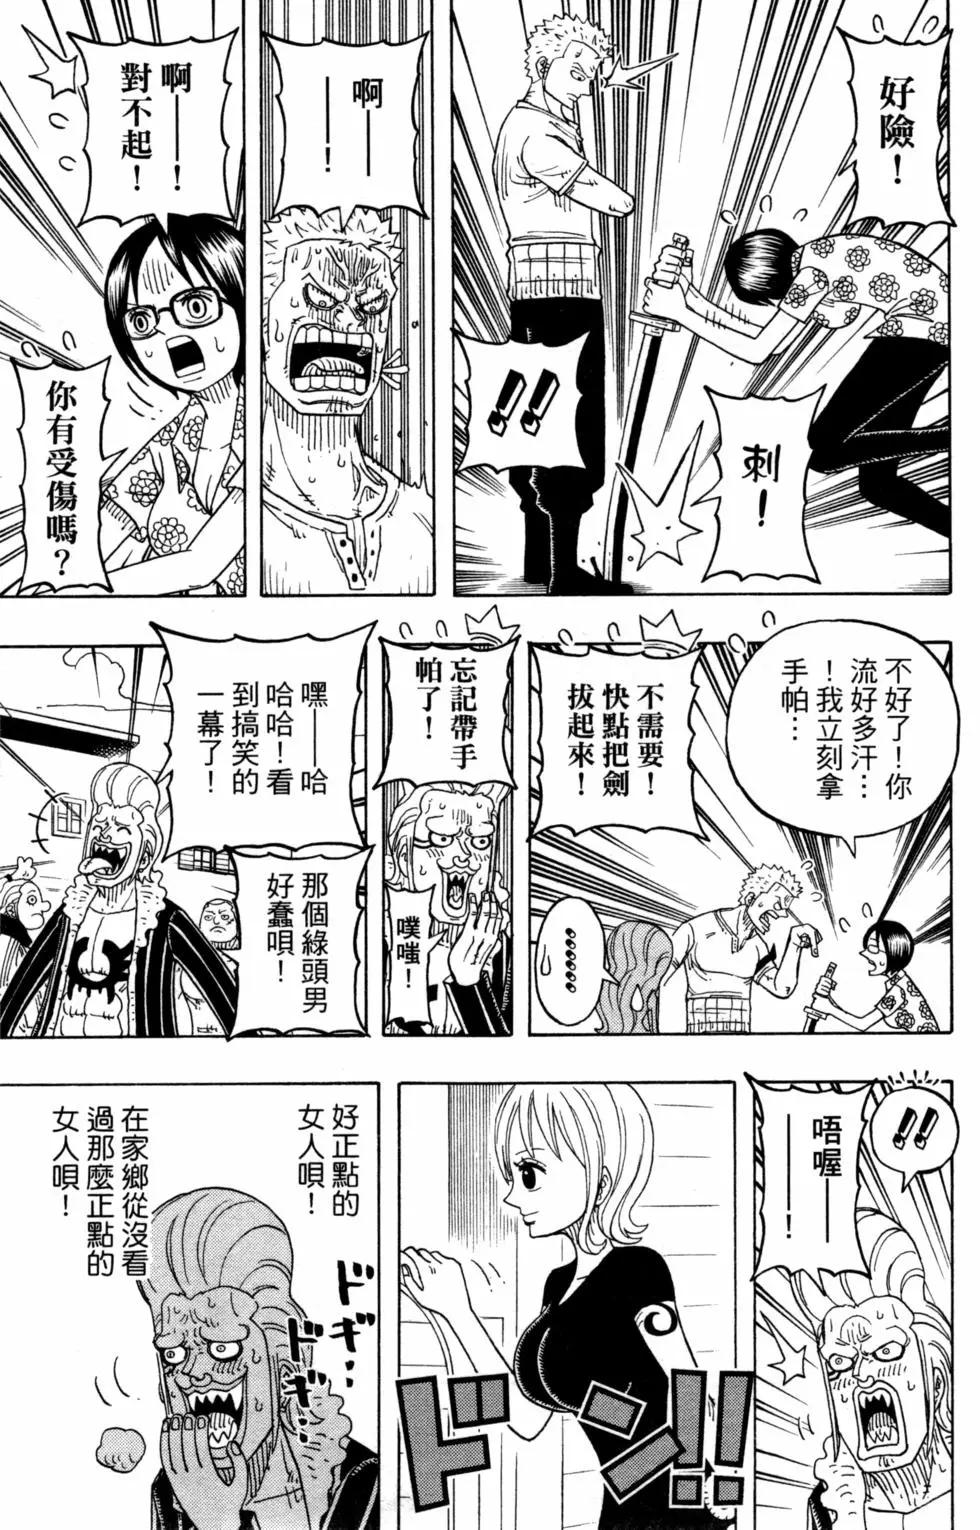 One piece party - 第06卷(2/4) - 4